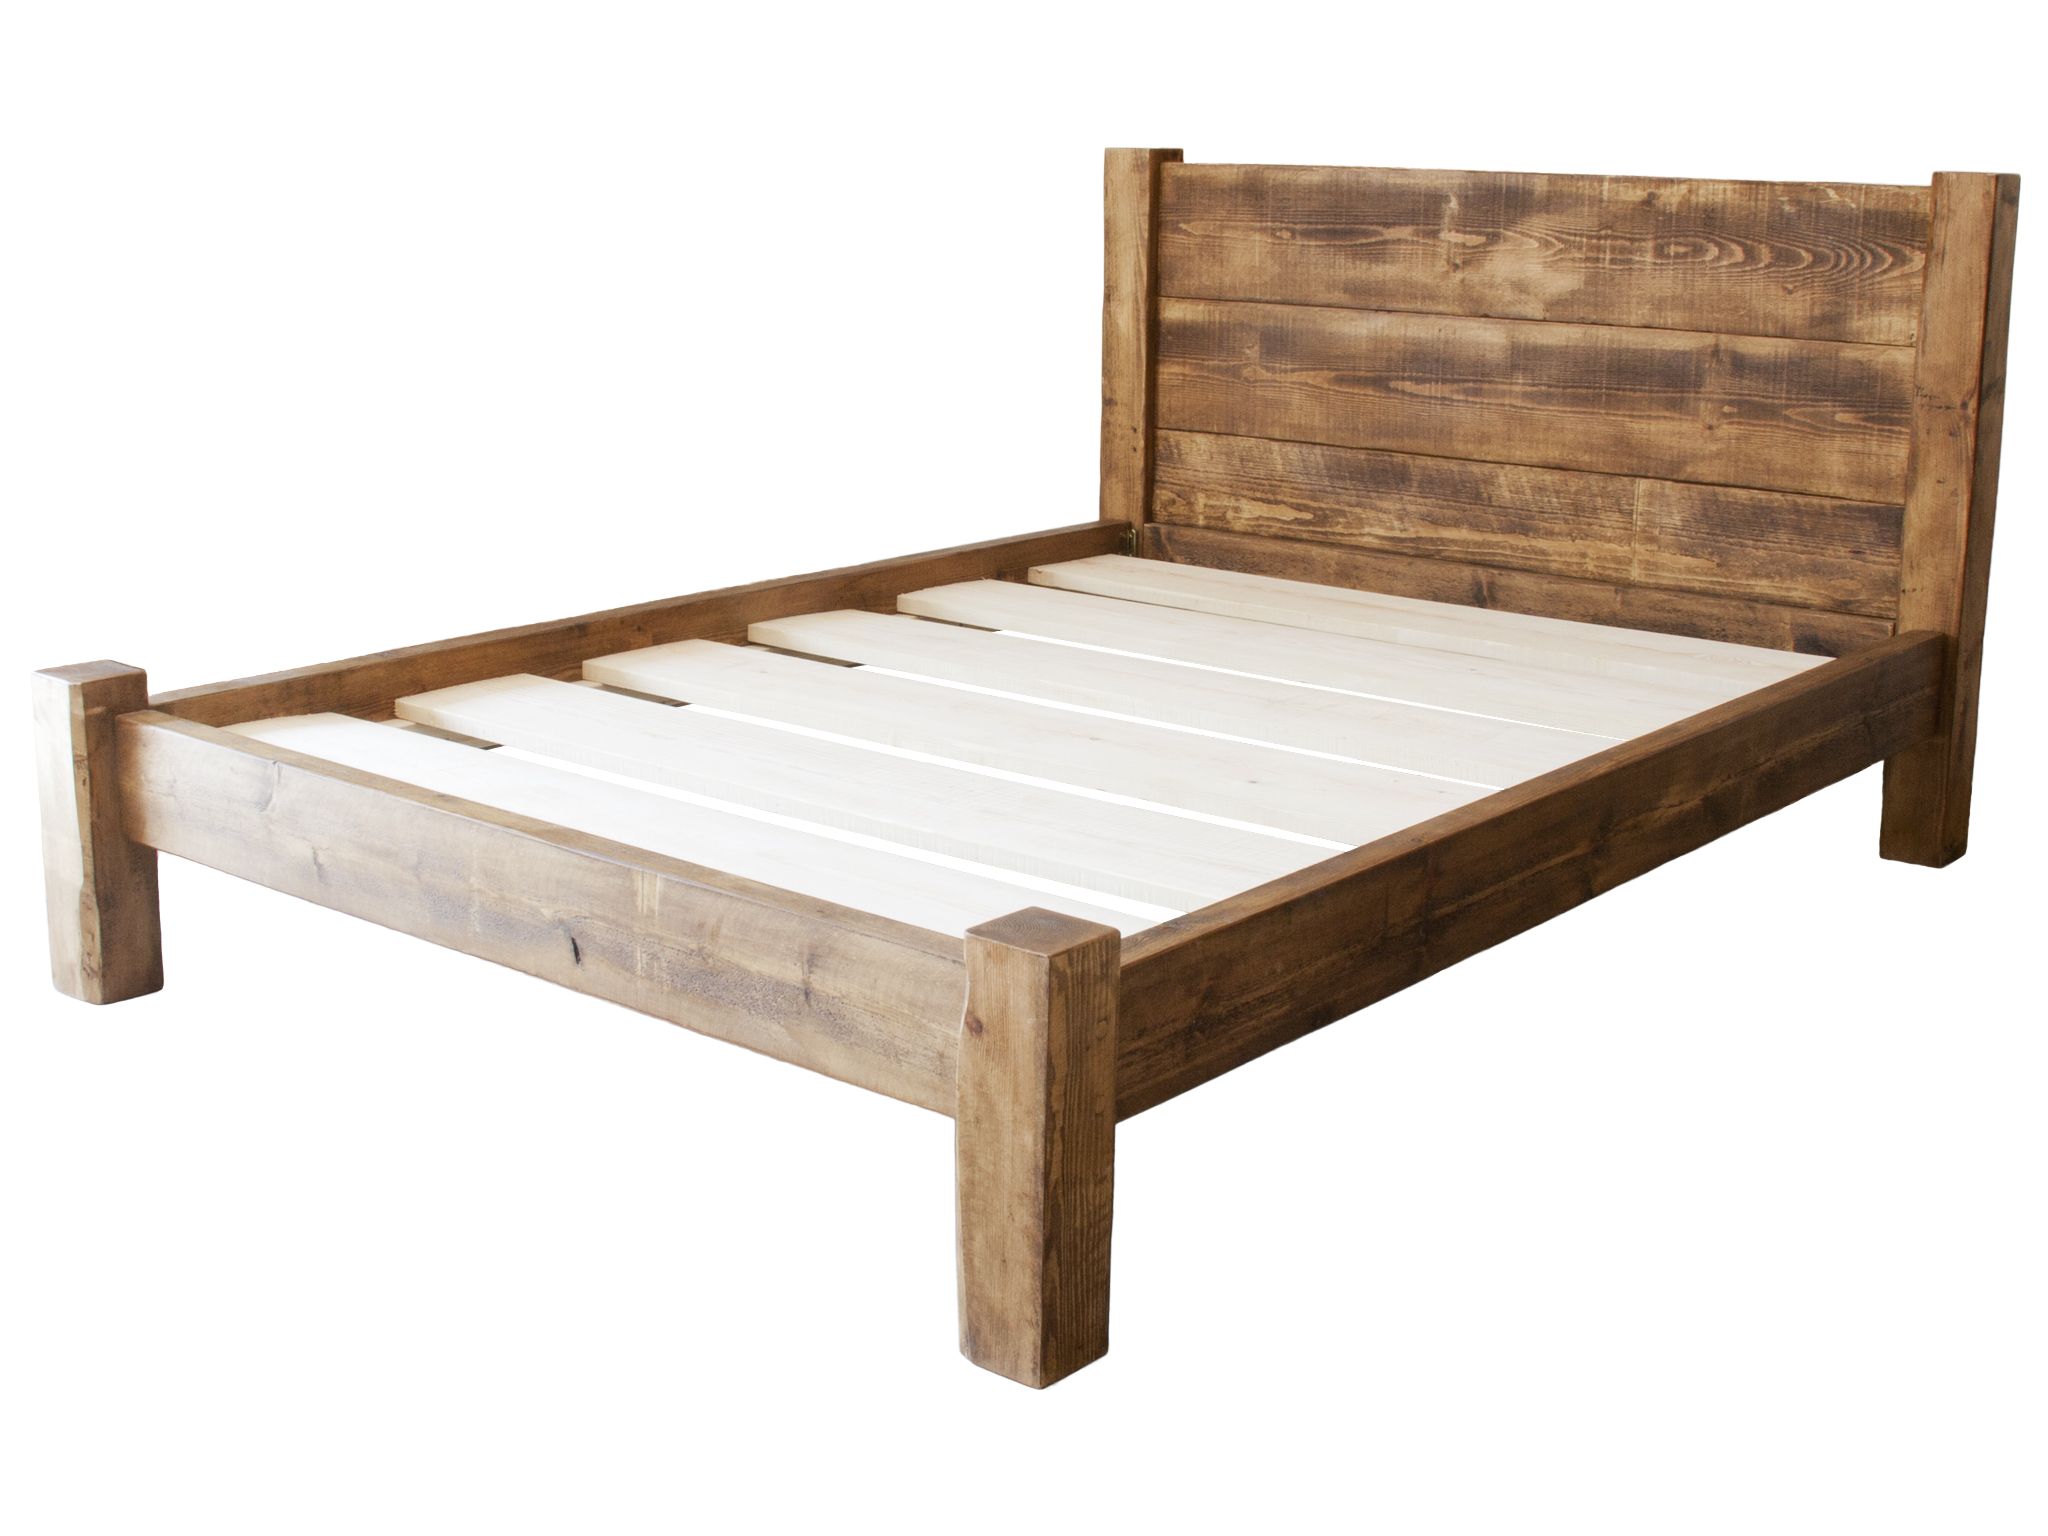 These Small Double beds are charming, yet simple. These Solid wood beds will sui...